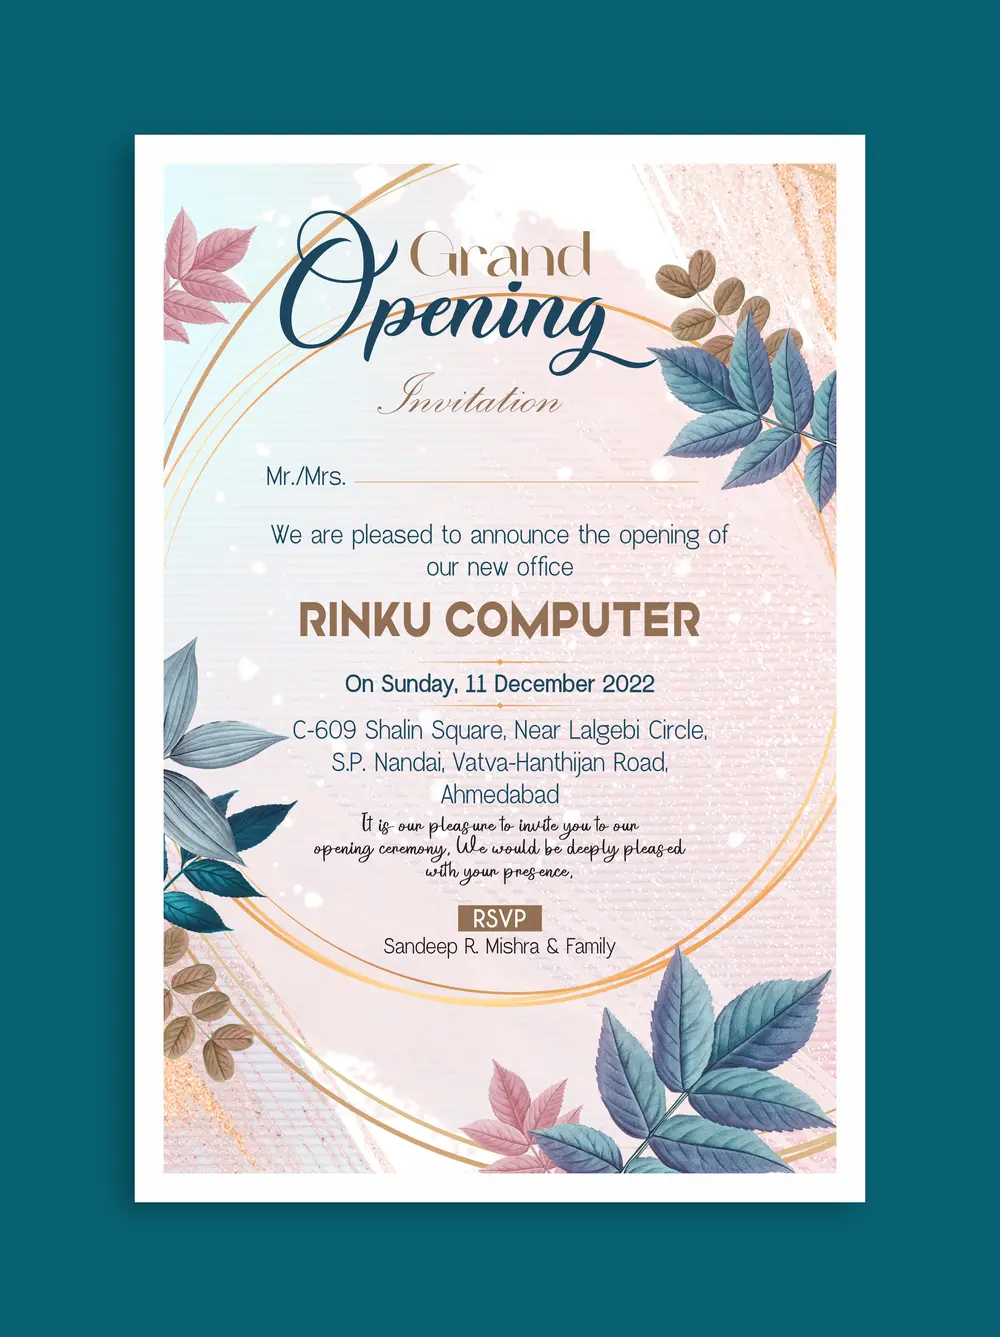 Grand-opening-invitation-card-cdr-and-psd-file-download